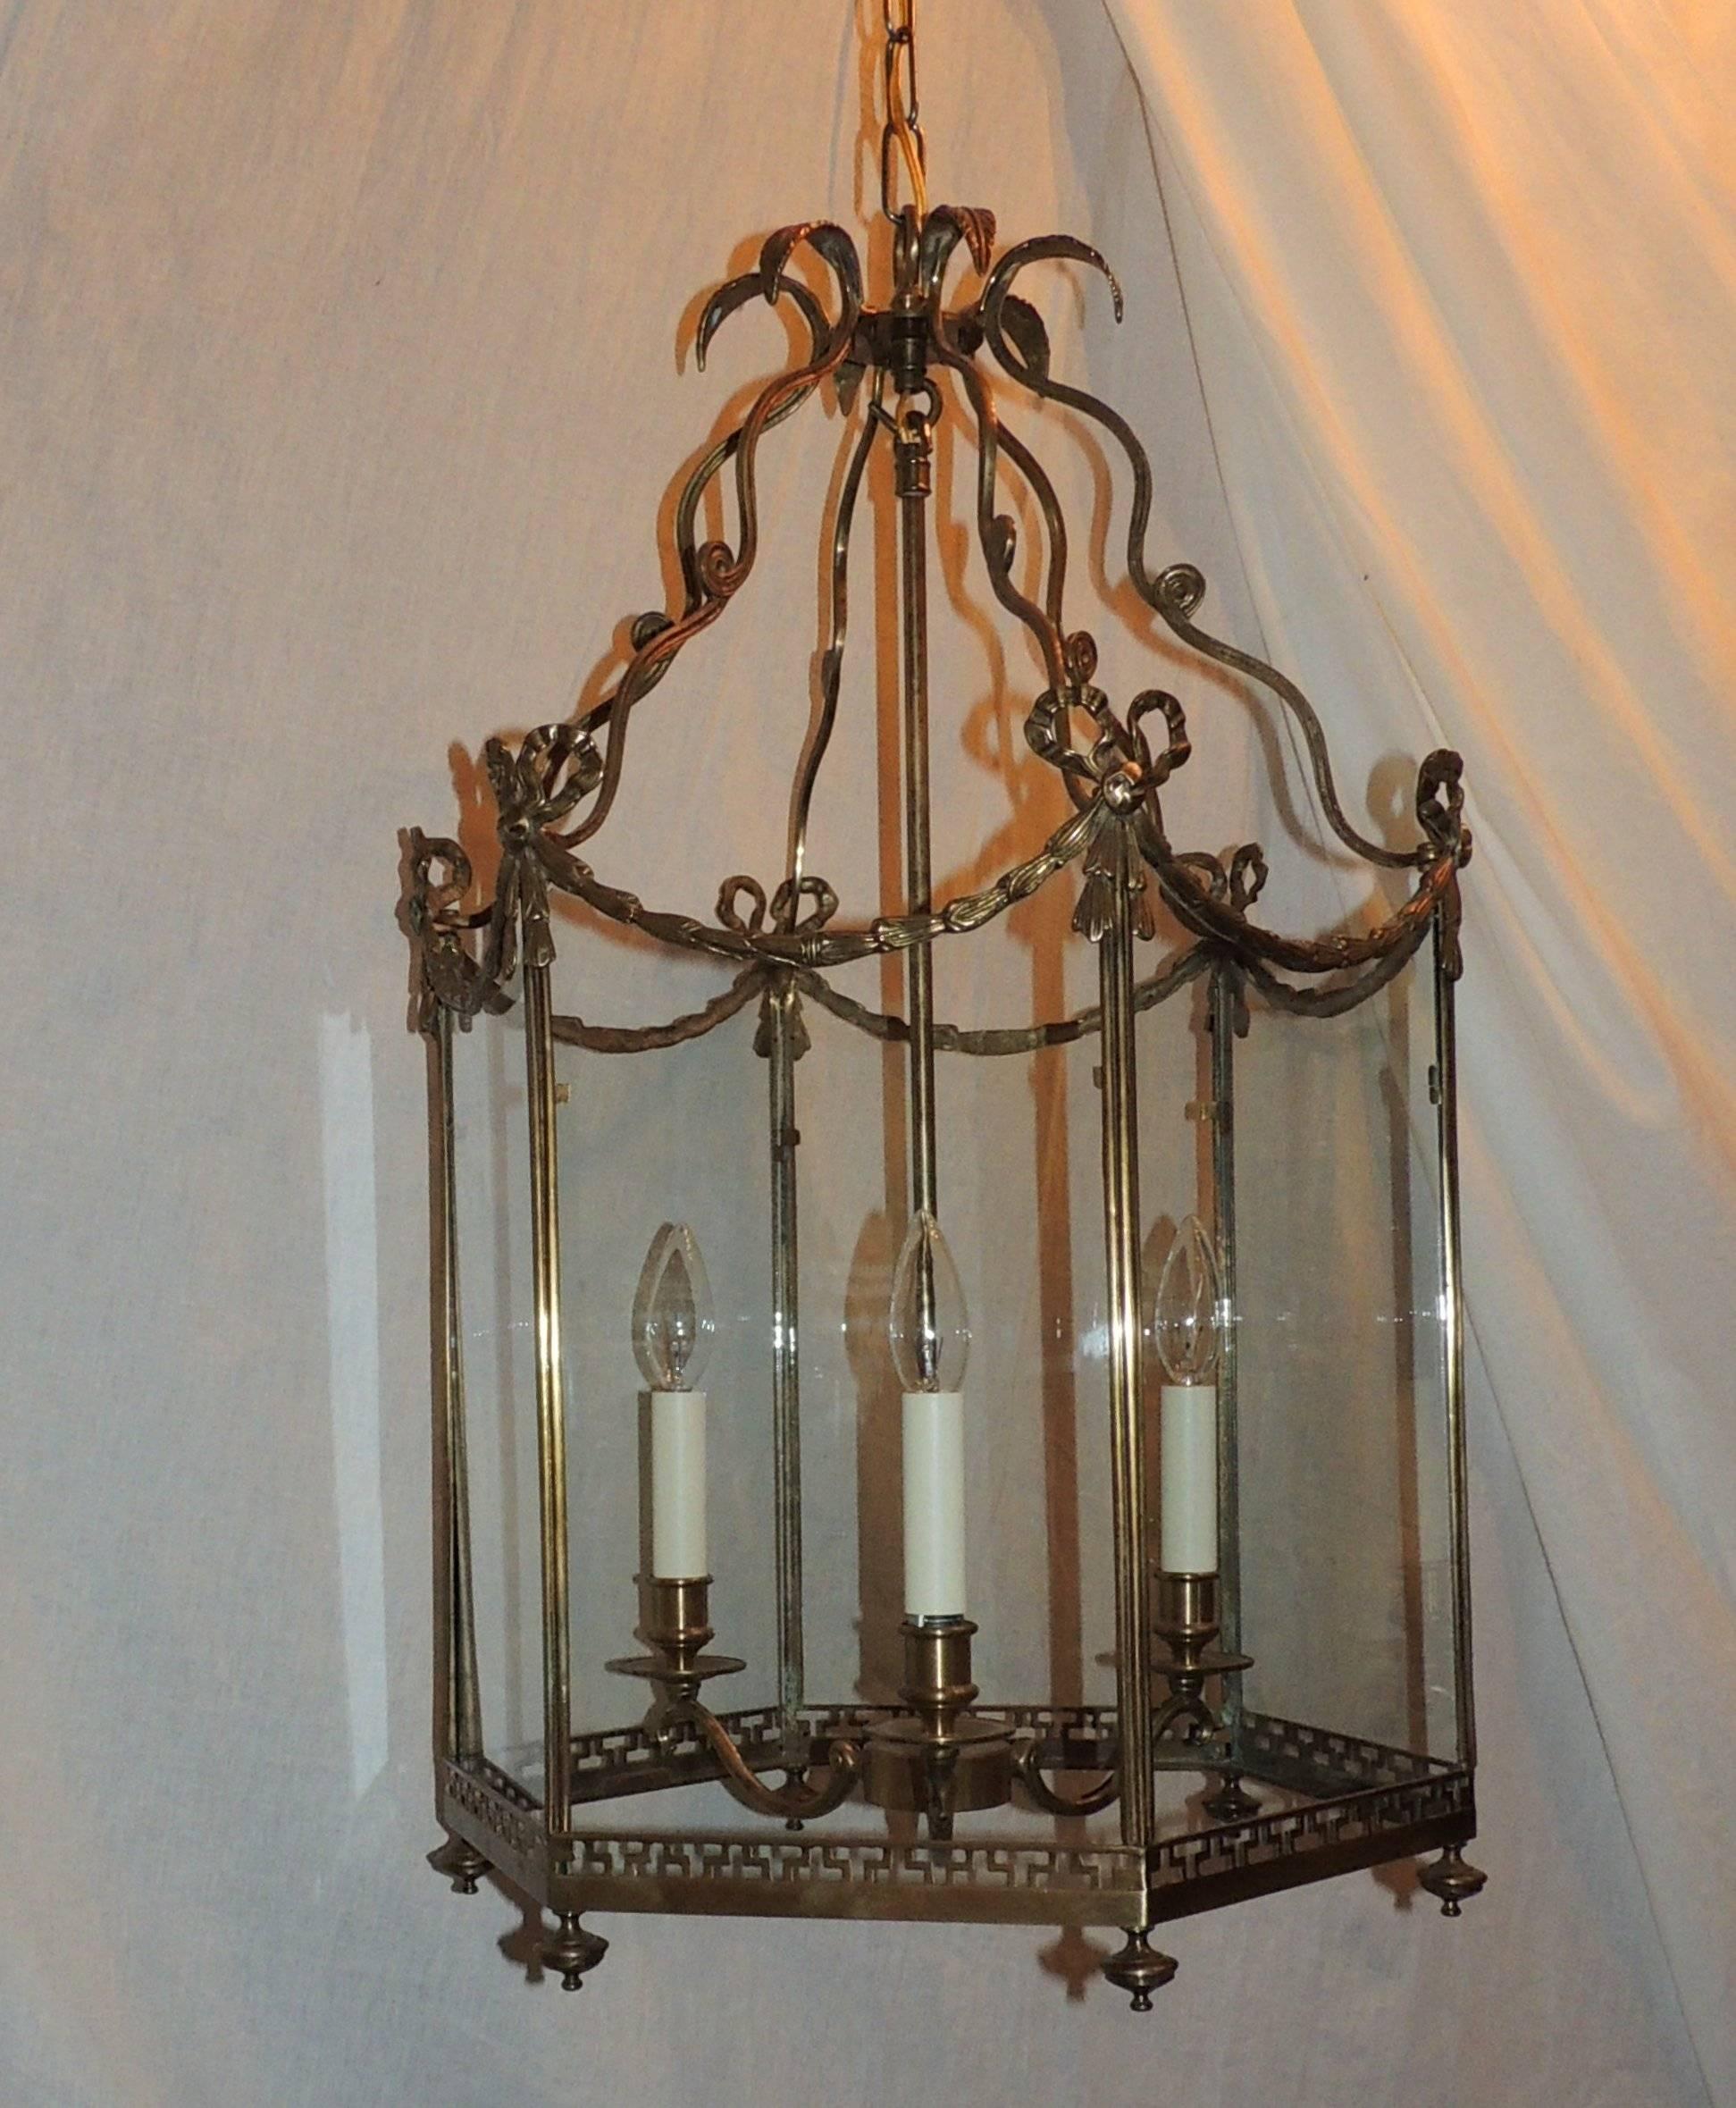 Beautiful etched bronze hexagon shaped lantern, pendent or chandelier fixture with Greek key cutout design around the bottom, fluted edges filigree edges the top edge and ribbon bows highlight the corners.
New wires and sockets.
Measures: 29